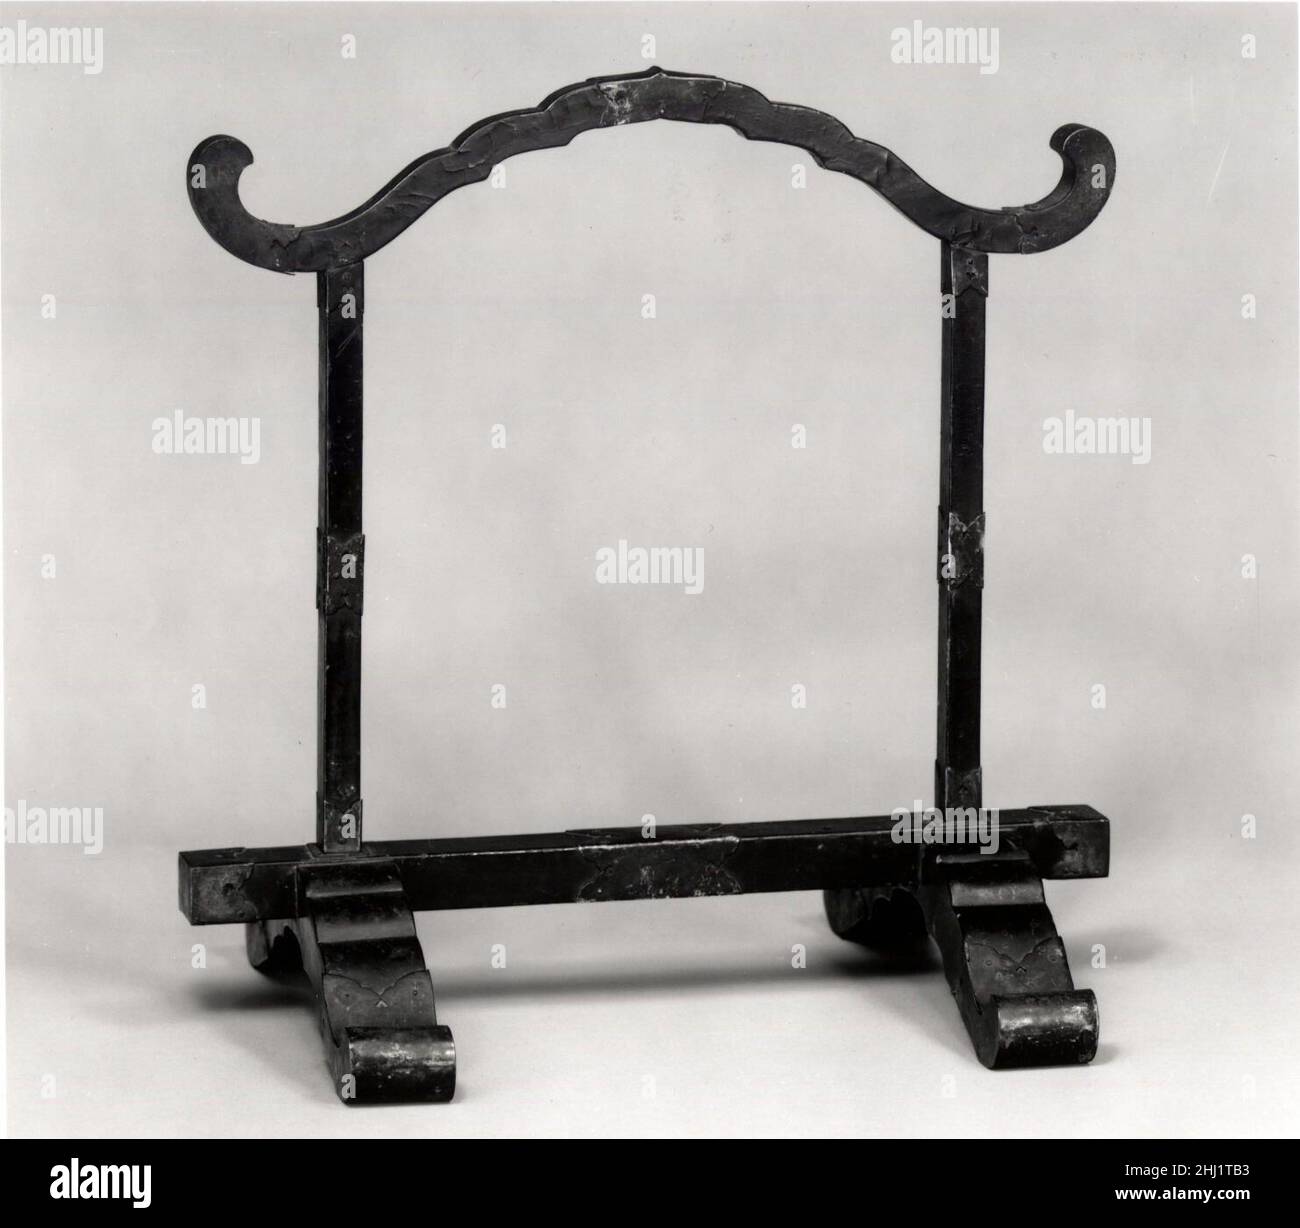 Gong stand dated 1221 Japan. Gong stand  56377 Stock Photo